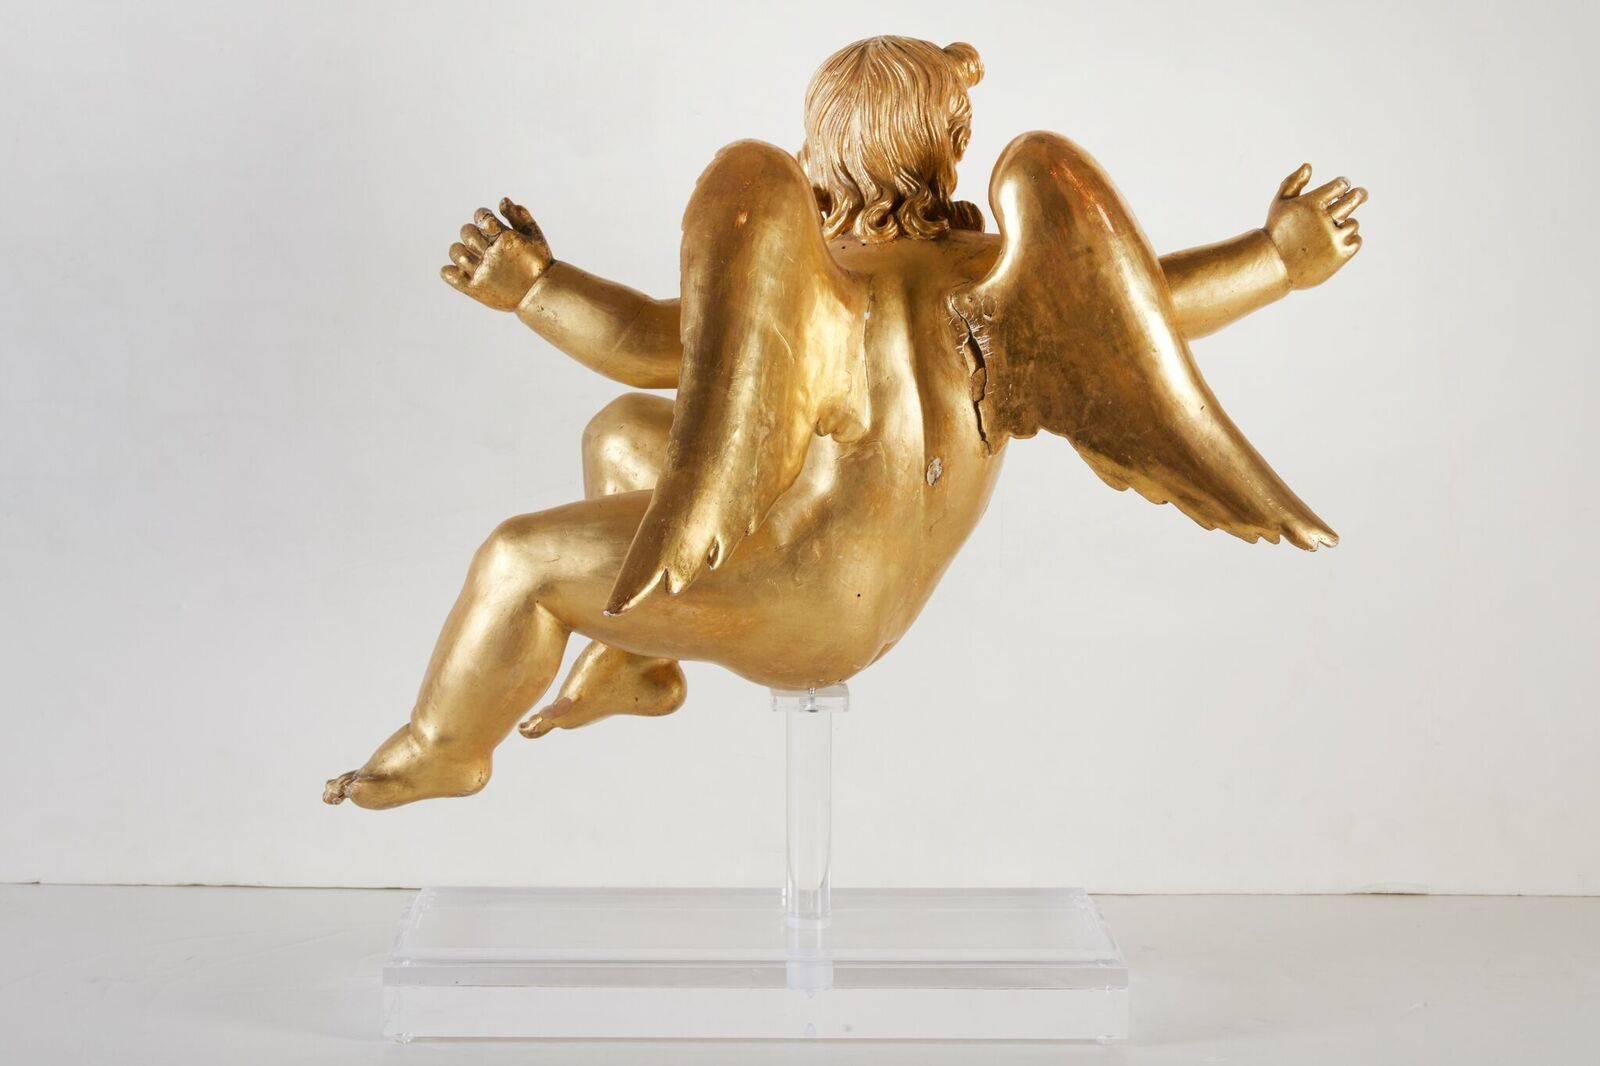 Fine pair of left and right, hand-carved, gessoed and 22-karat gold gilded, angels singing in adoration while in flight. Both later mounted on custom, Lucite stands. Originally from a grand altar.